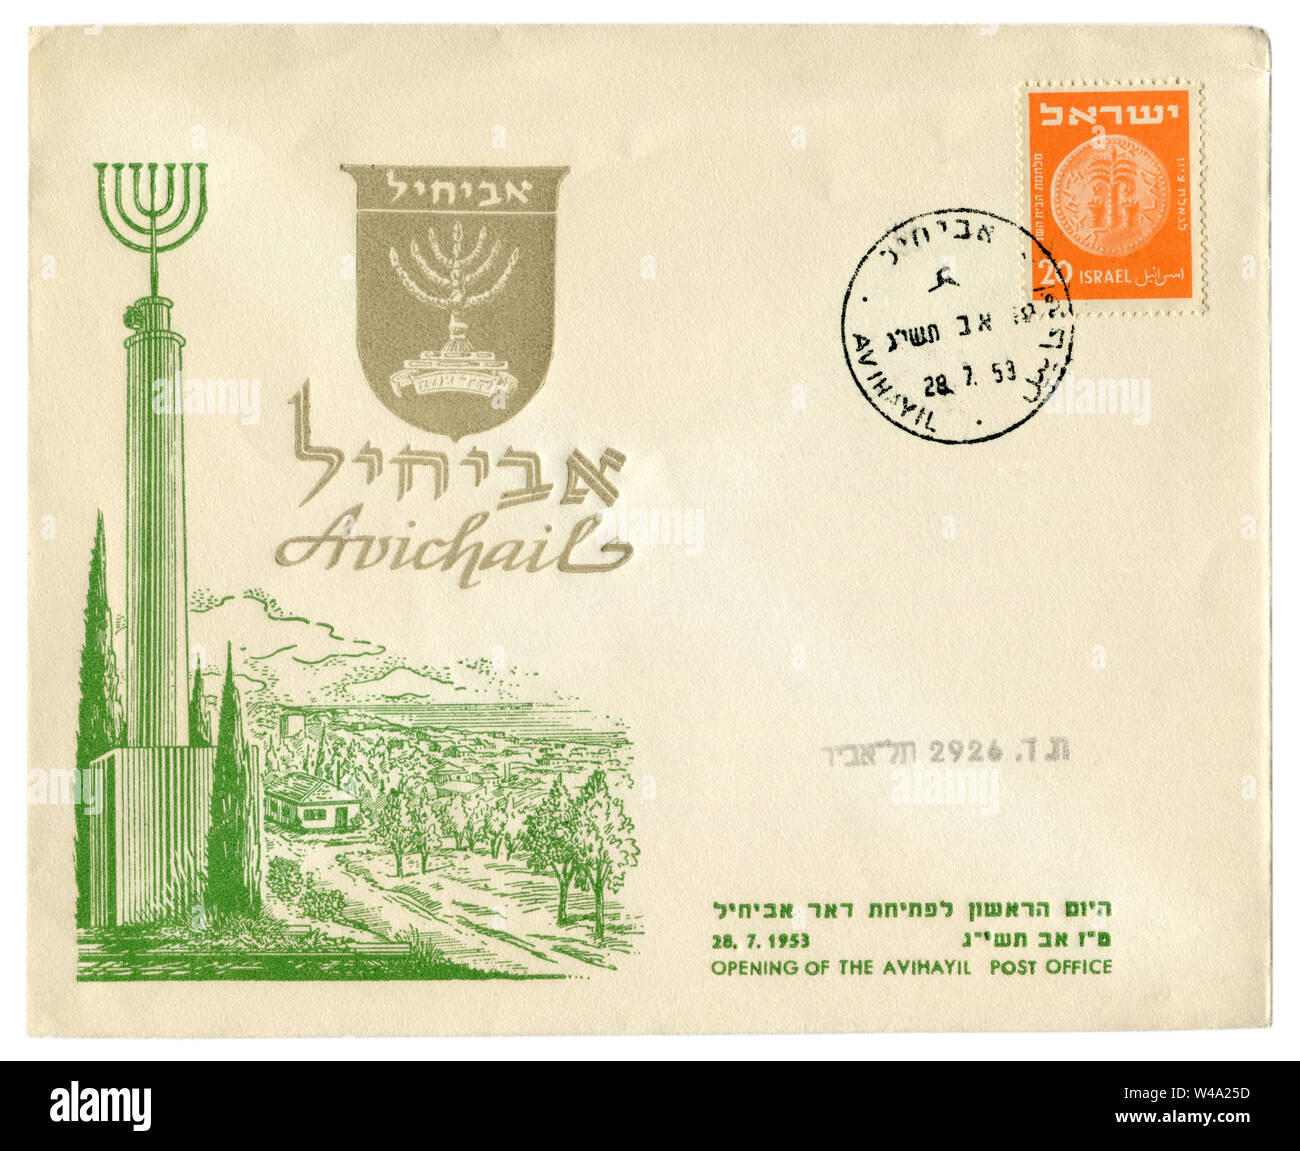 Avihayil, Israel - 28 July 1953: Israeli historical envelope: cover with cachet opening post office, moshav town with small houses surrounded by trees Stock Photo